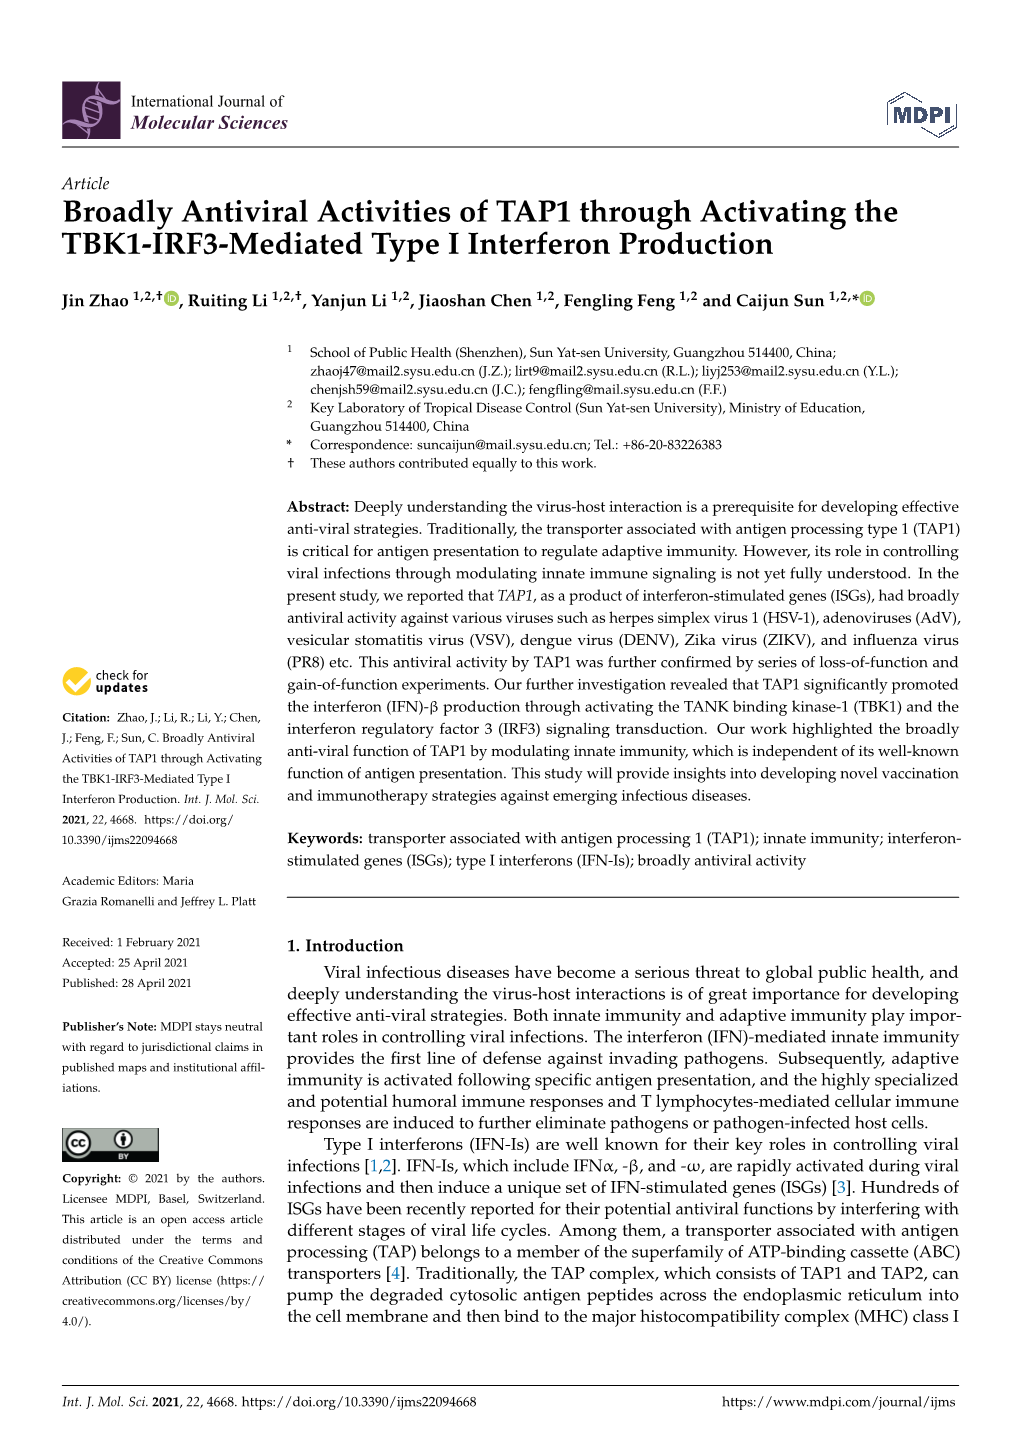 Broadly Antiviral Activities of TAP1 Through Activating the TBK1-IRF3-Mediated Type I Interferon Production